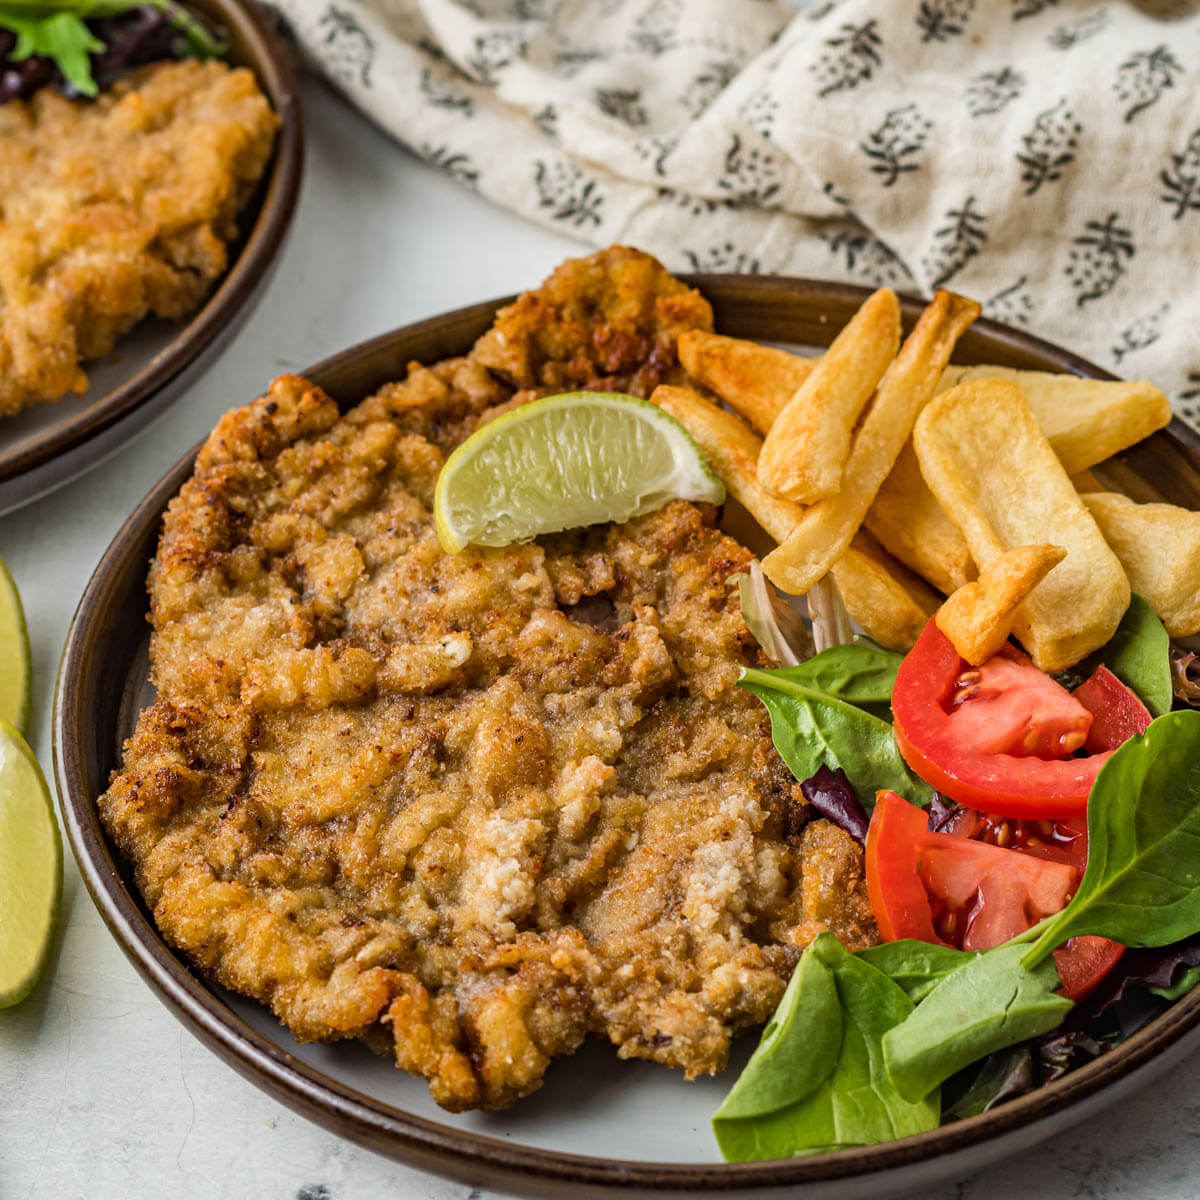 A plate full of golden fried Milanesa de res with chips and a salad.